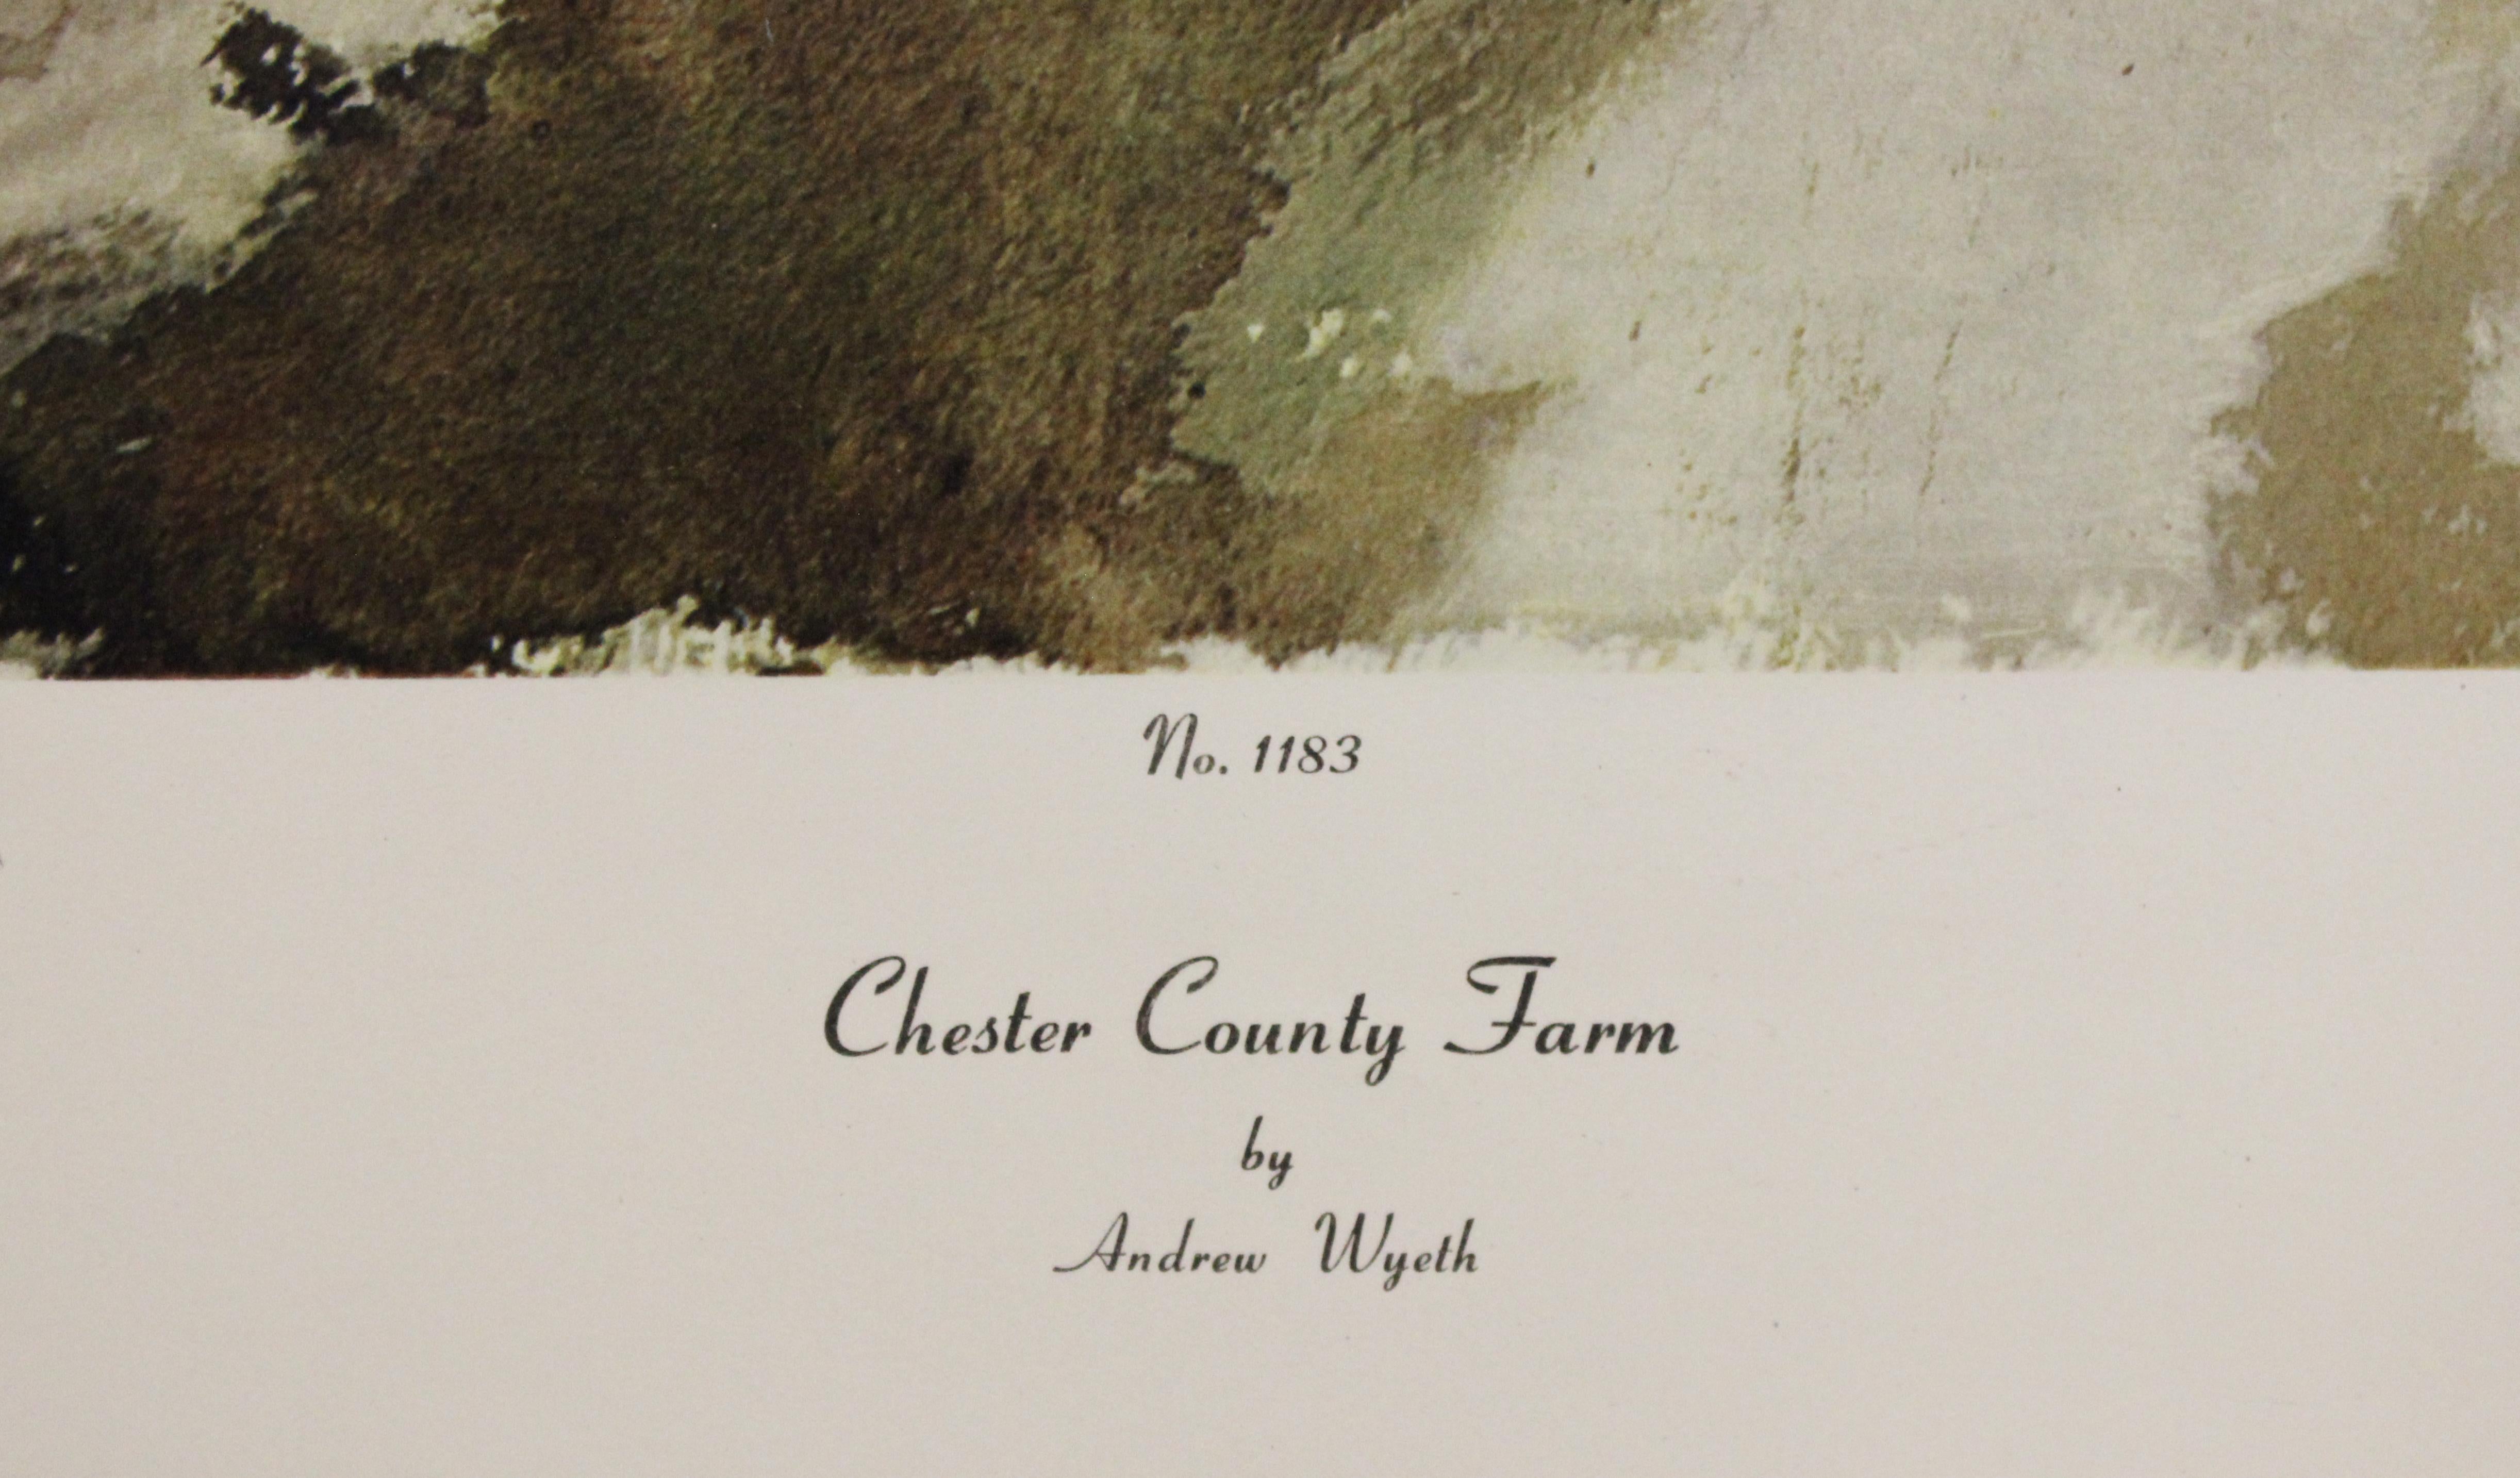 Chester County Farm-Poster. Copyright Aaron Ashley, Inc. - Print by (after) Andrew Wyeth